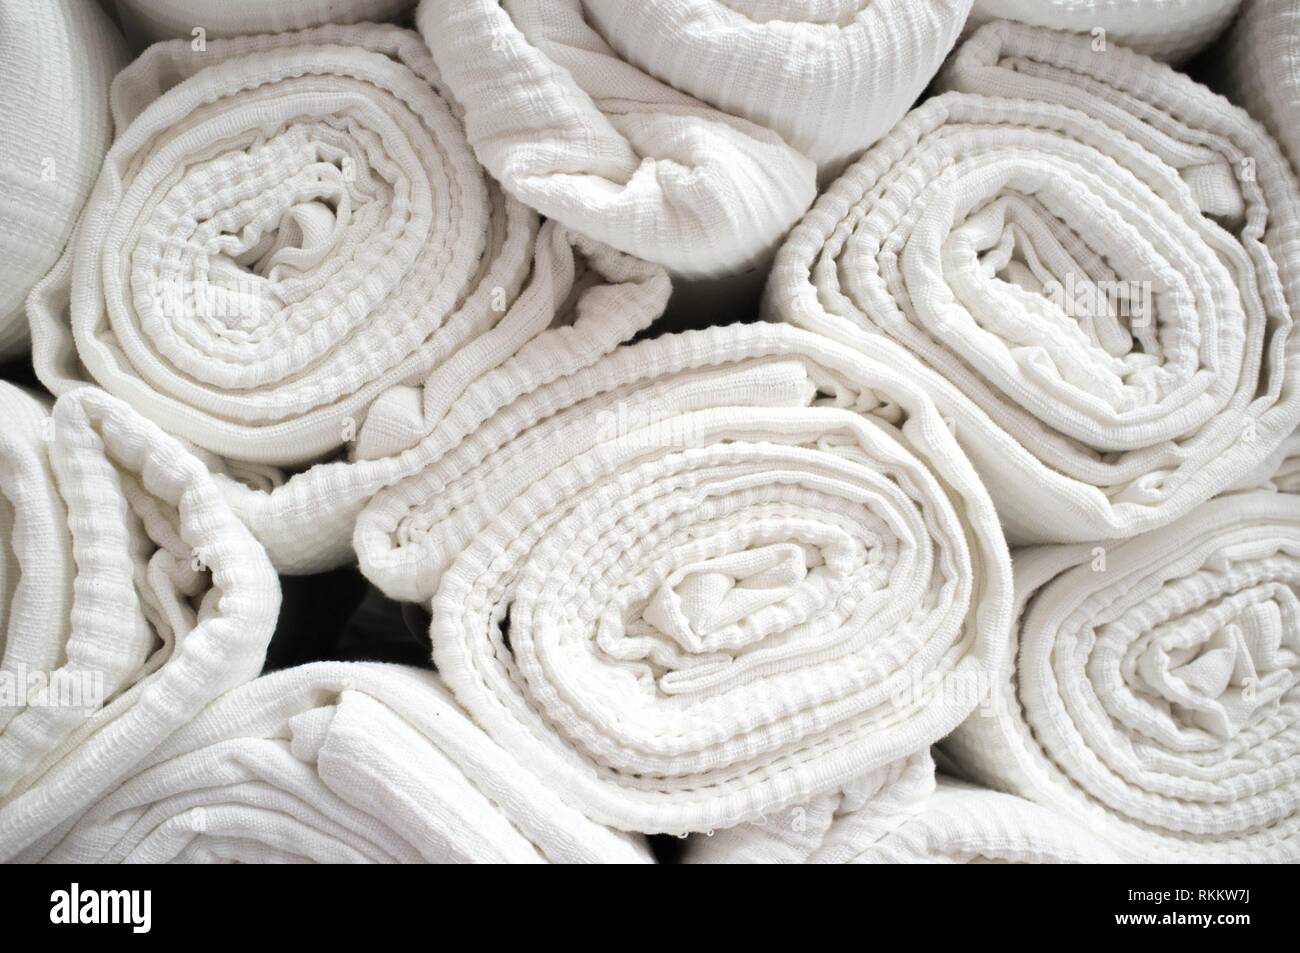 Loads of rolled white cotton bedspreads. Closeup. Stock Photo